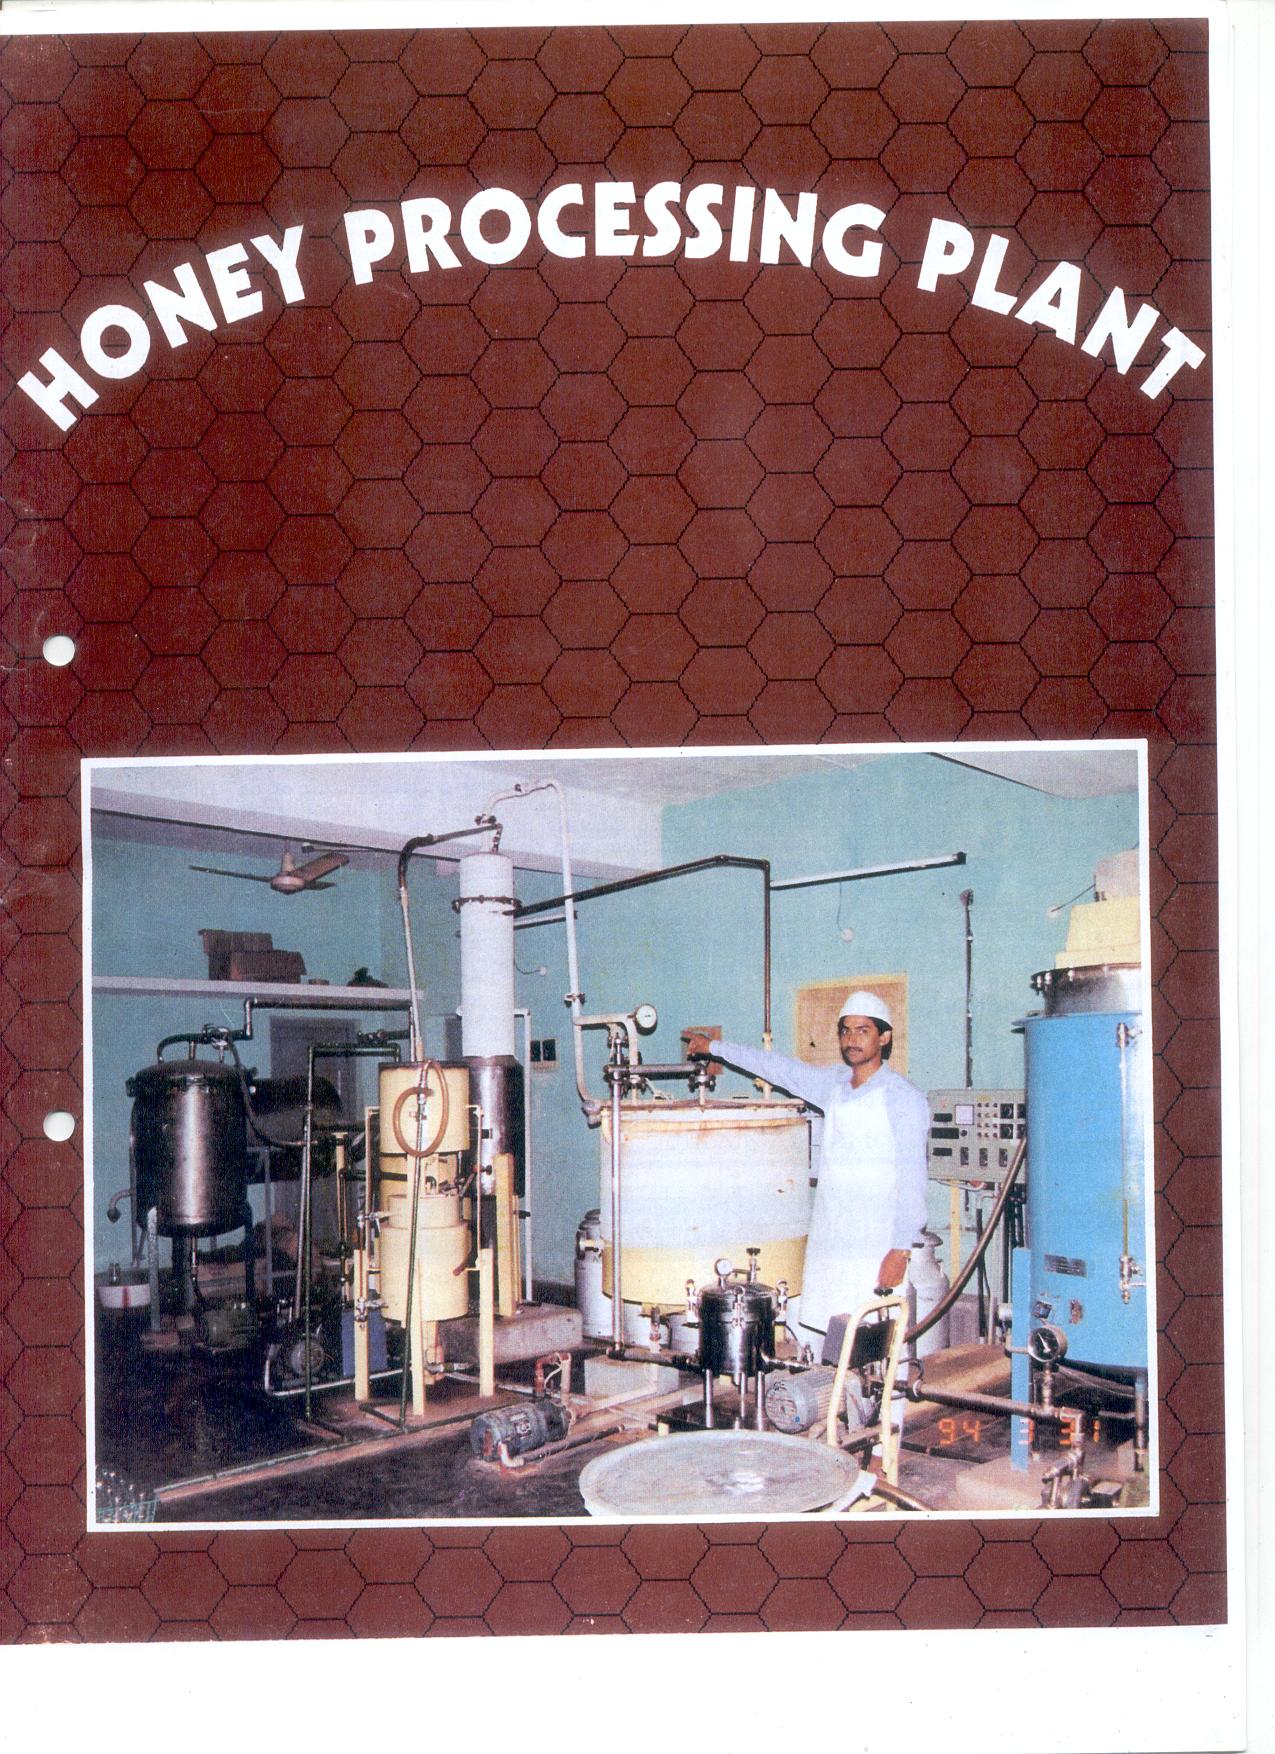 Honey Processing Plant, Laundry and Toilet Soap, Cosmetic Plant